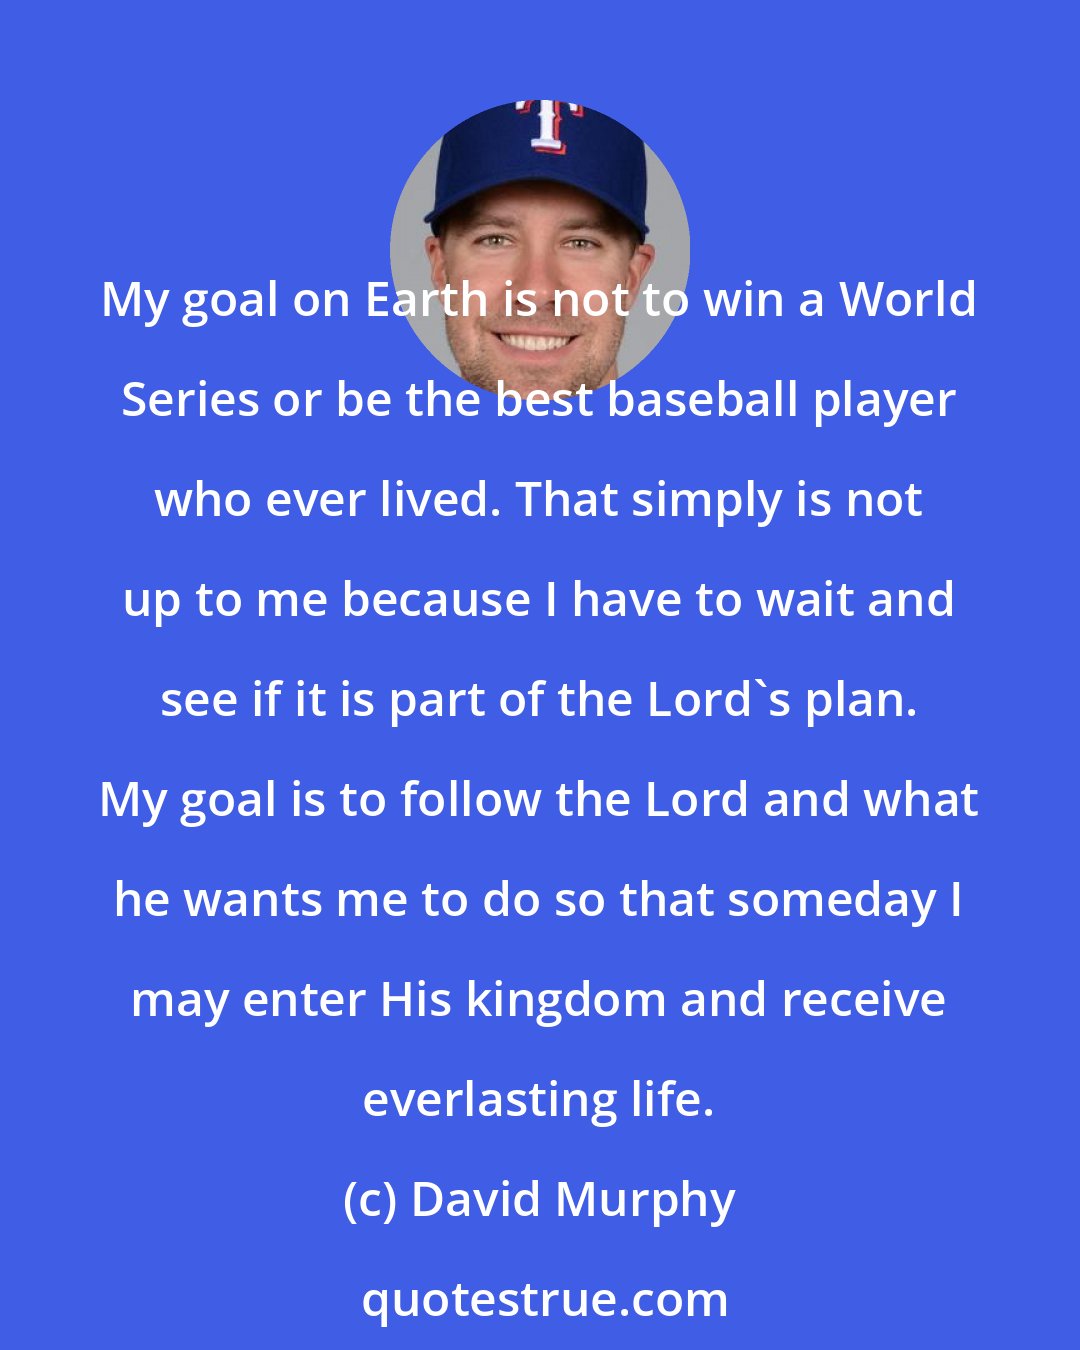 David Murphy: My goal on Earth is not to win a World Series or be the best baseball player who ever lived. That simply is not up to me because I have to wait and see if it is part of the Lord's plan. My goal is to follow the Lord and what he wants me to do so that someday I may enter His kingdom and receive everlasting life.